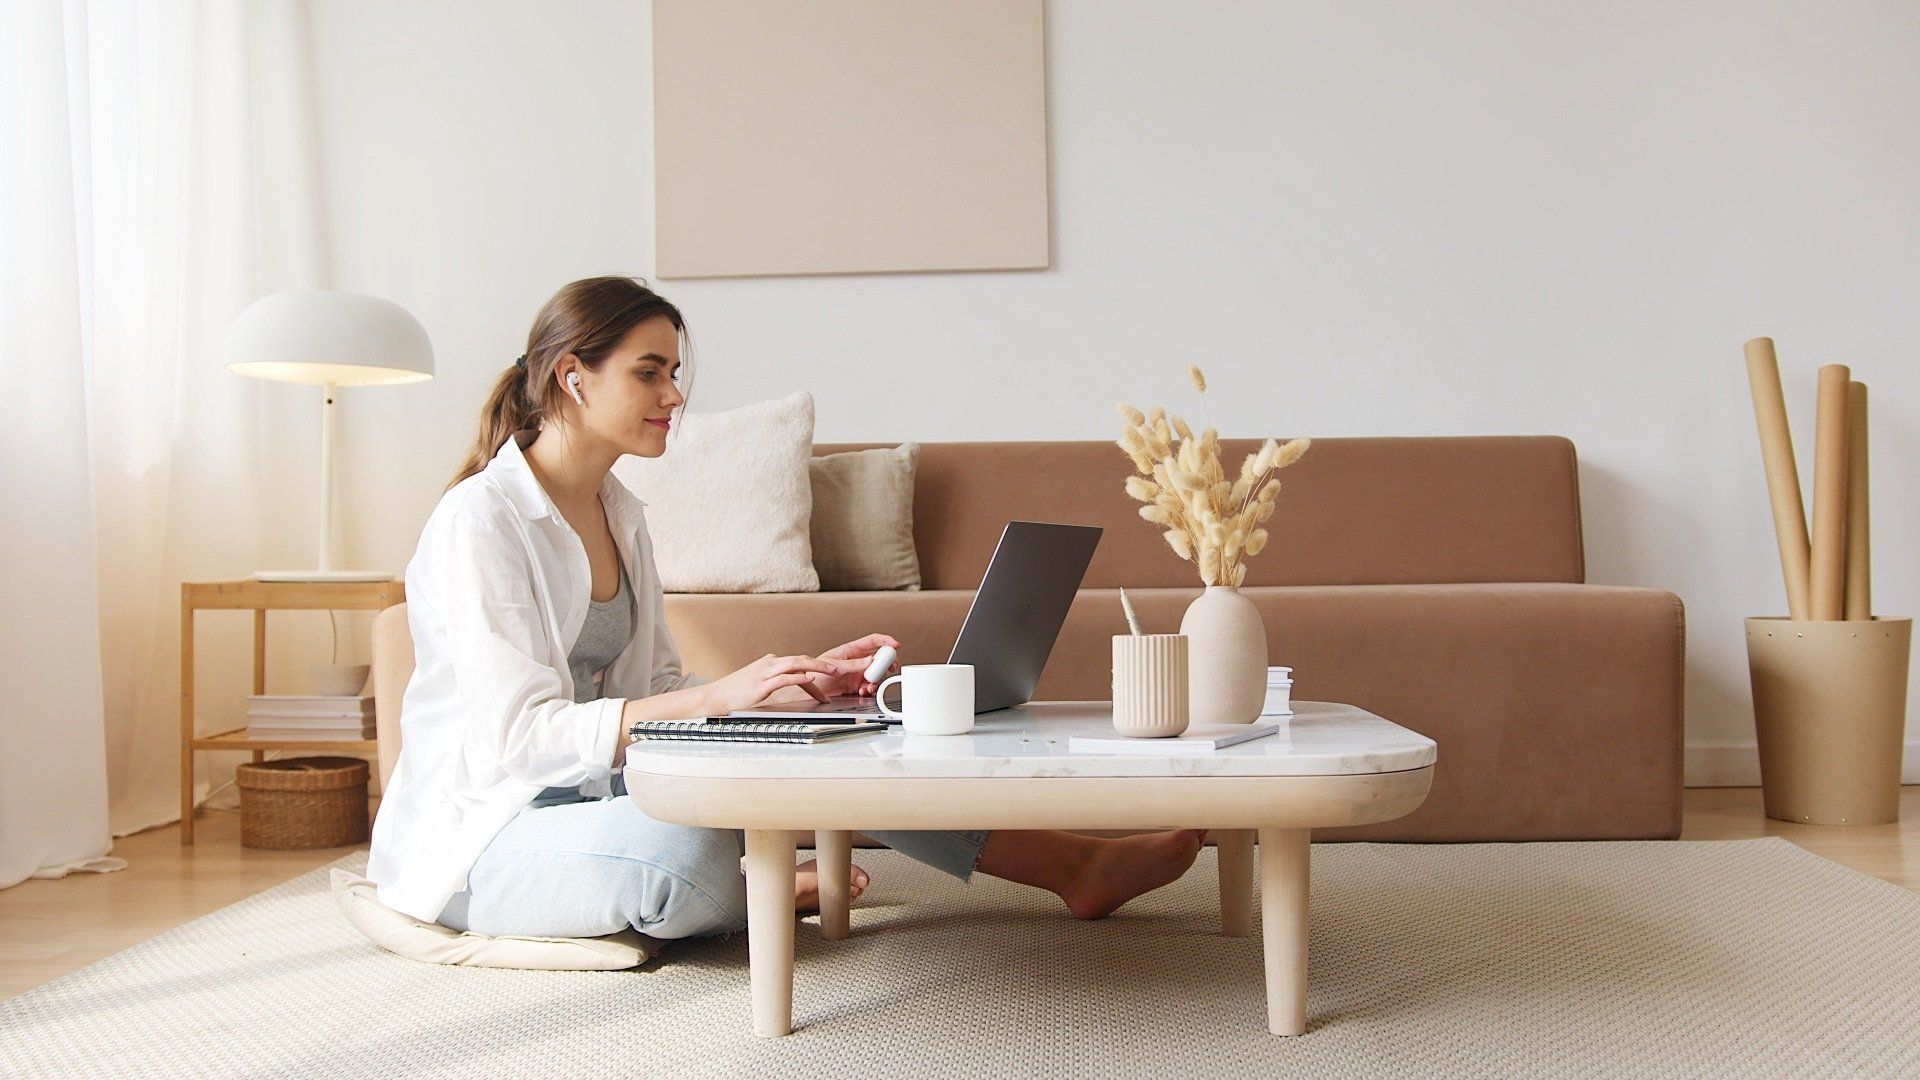 a woman is sitting on the floor in front of a couch using a laptop computer to write property descriptions for her new listings.